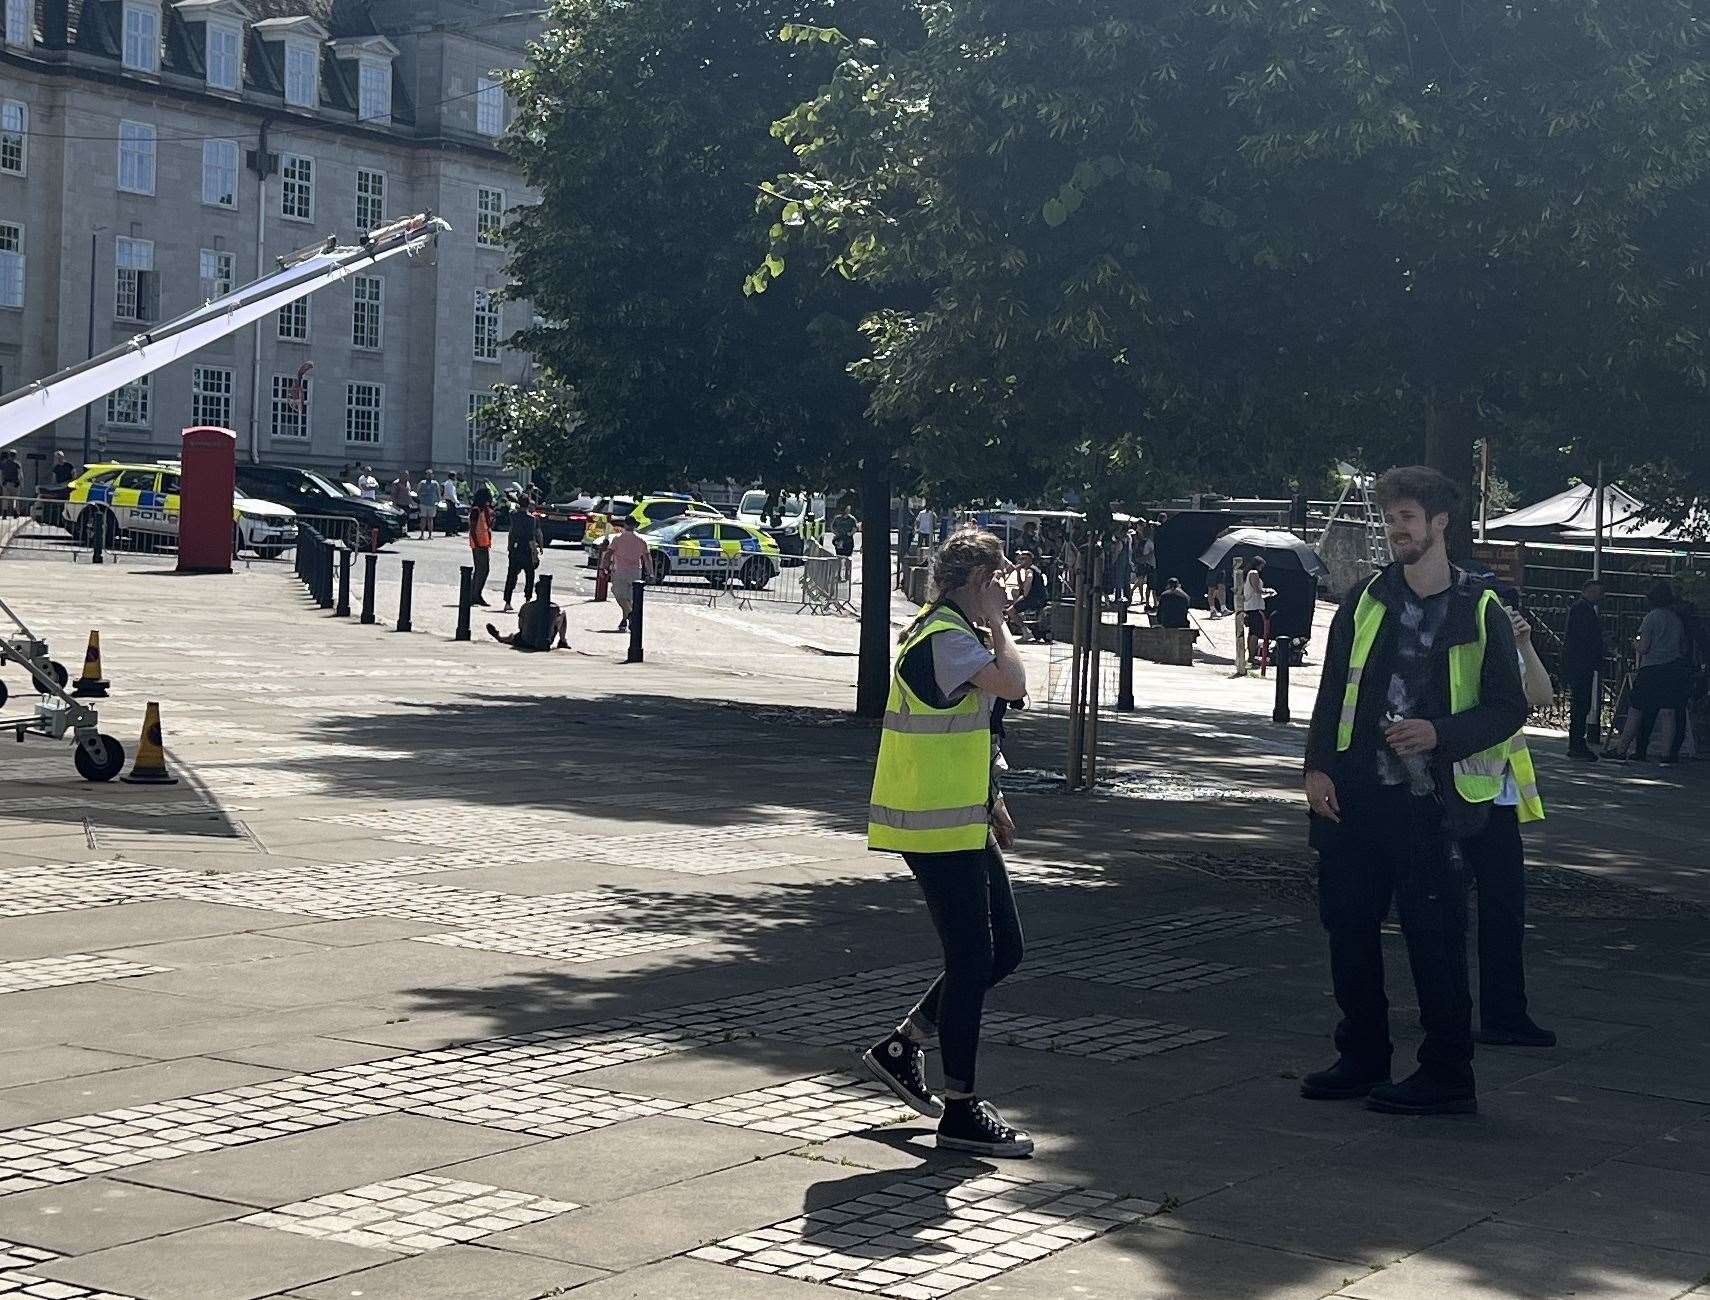 Crews were seen at County Hall in Maidstone for filming